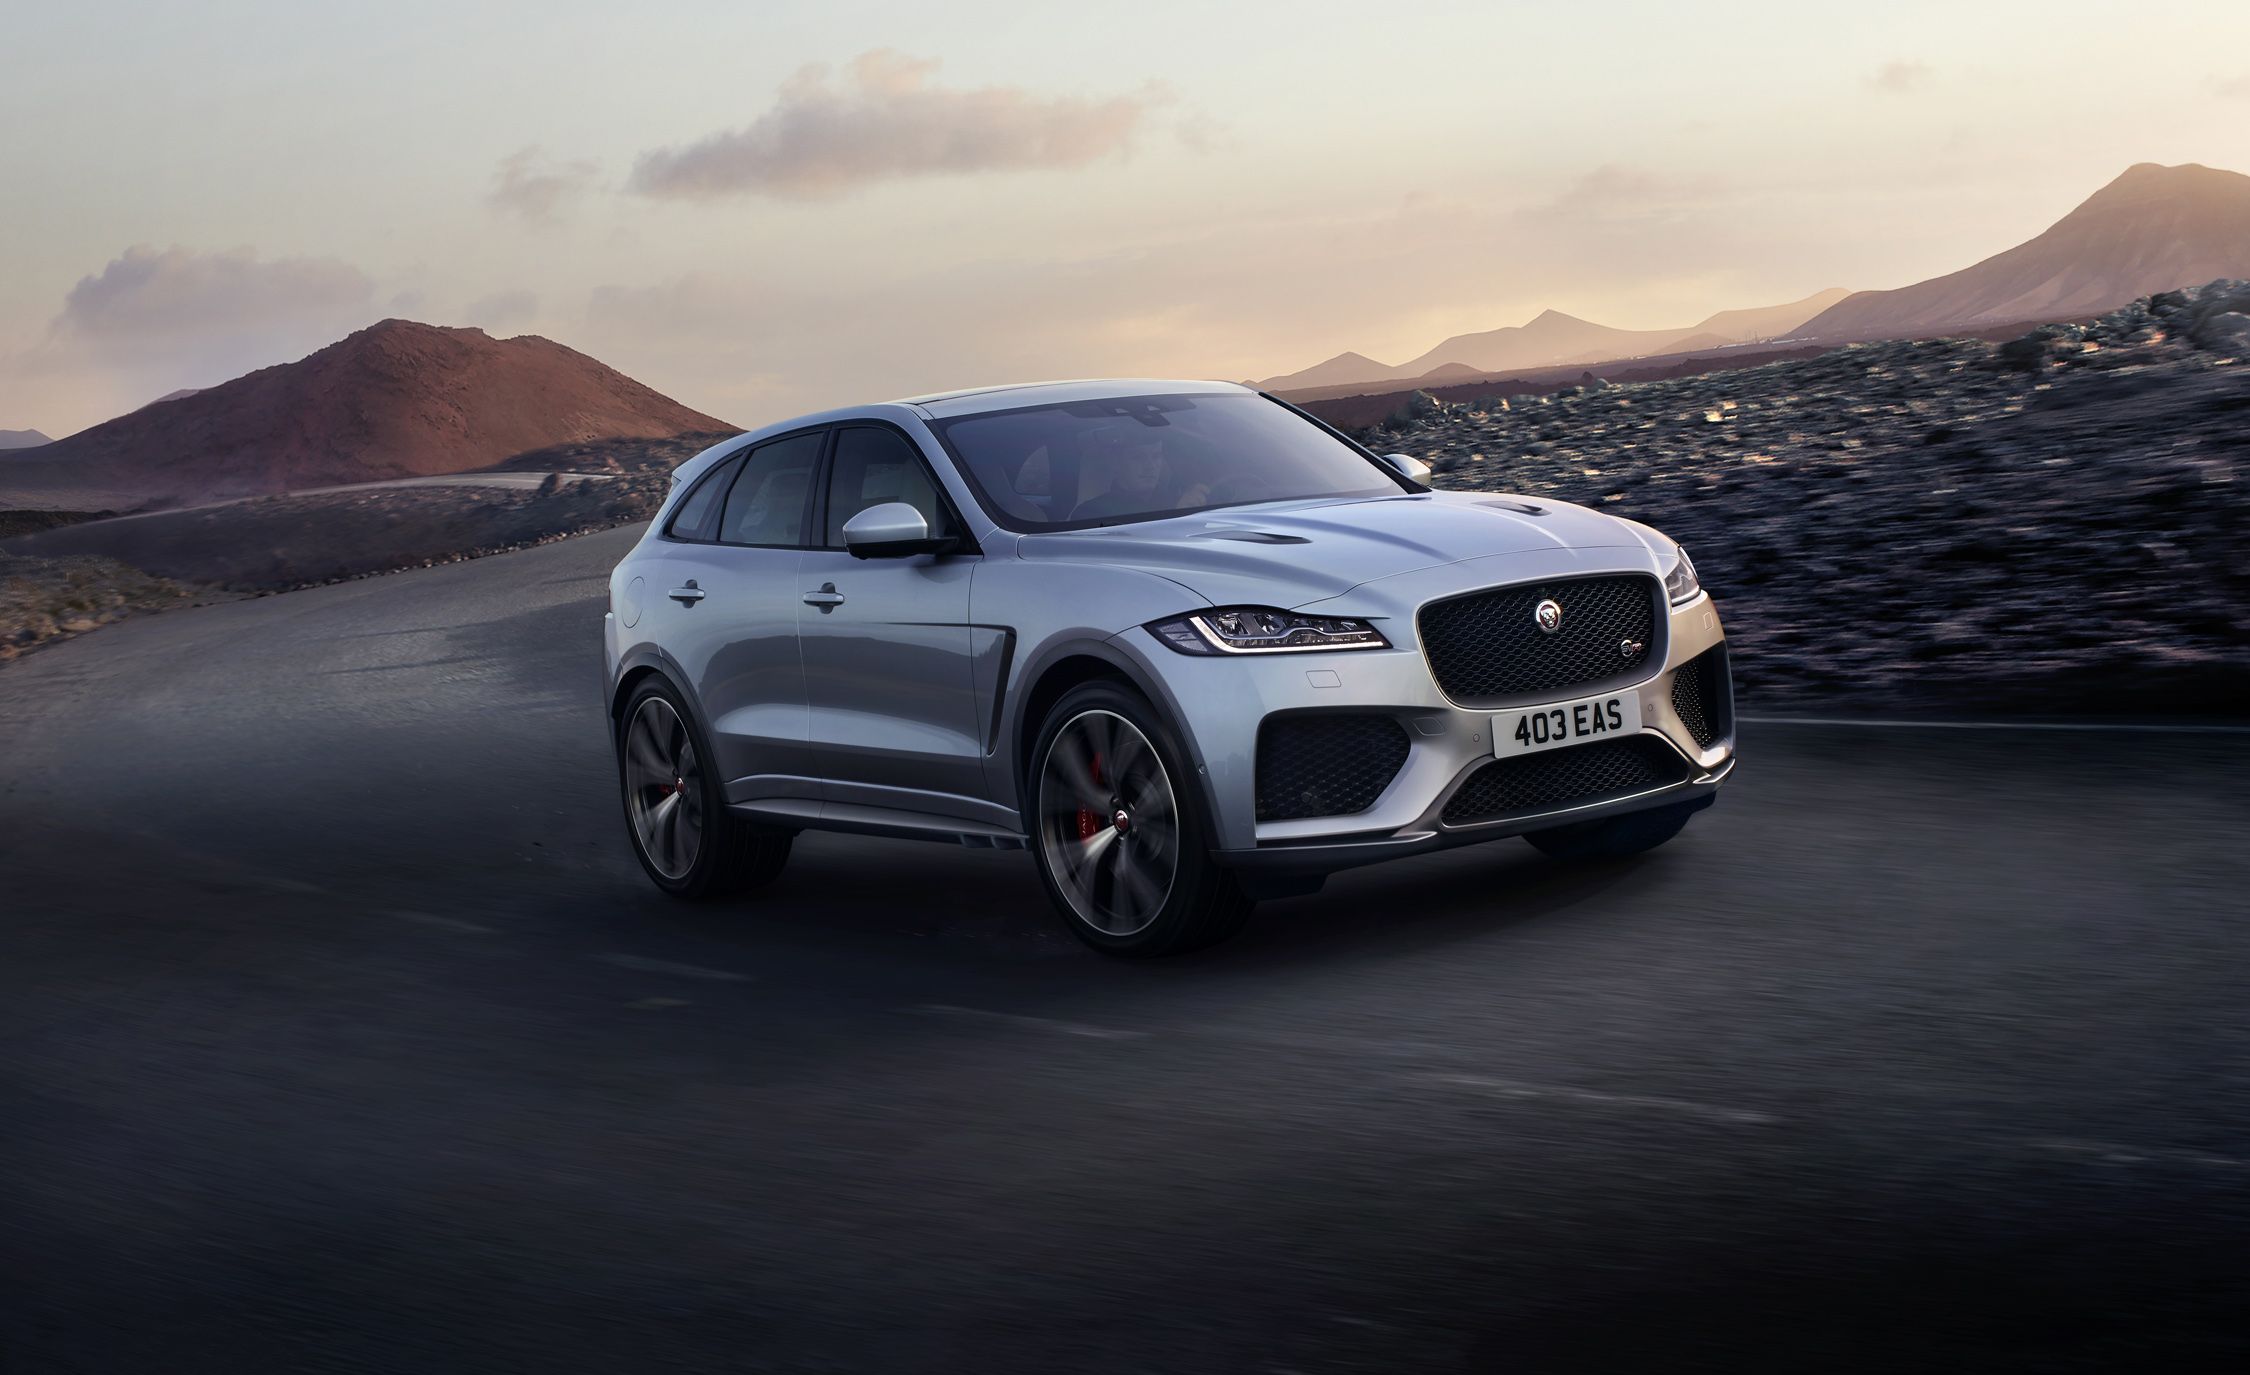 2019 Jaguar F-Pace SVR Review, Pricing, and Specs